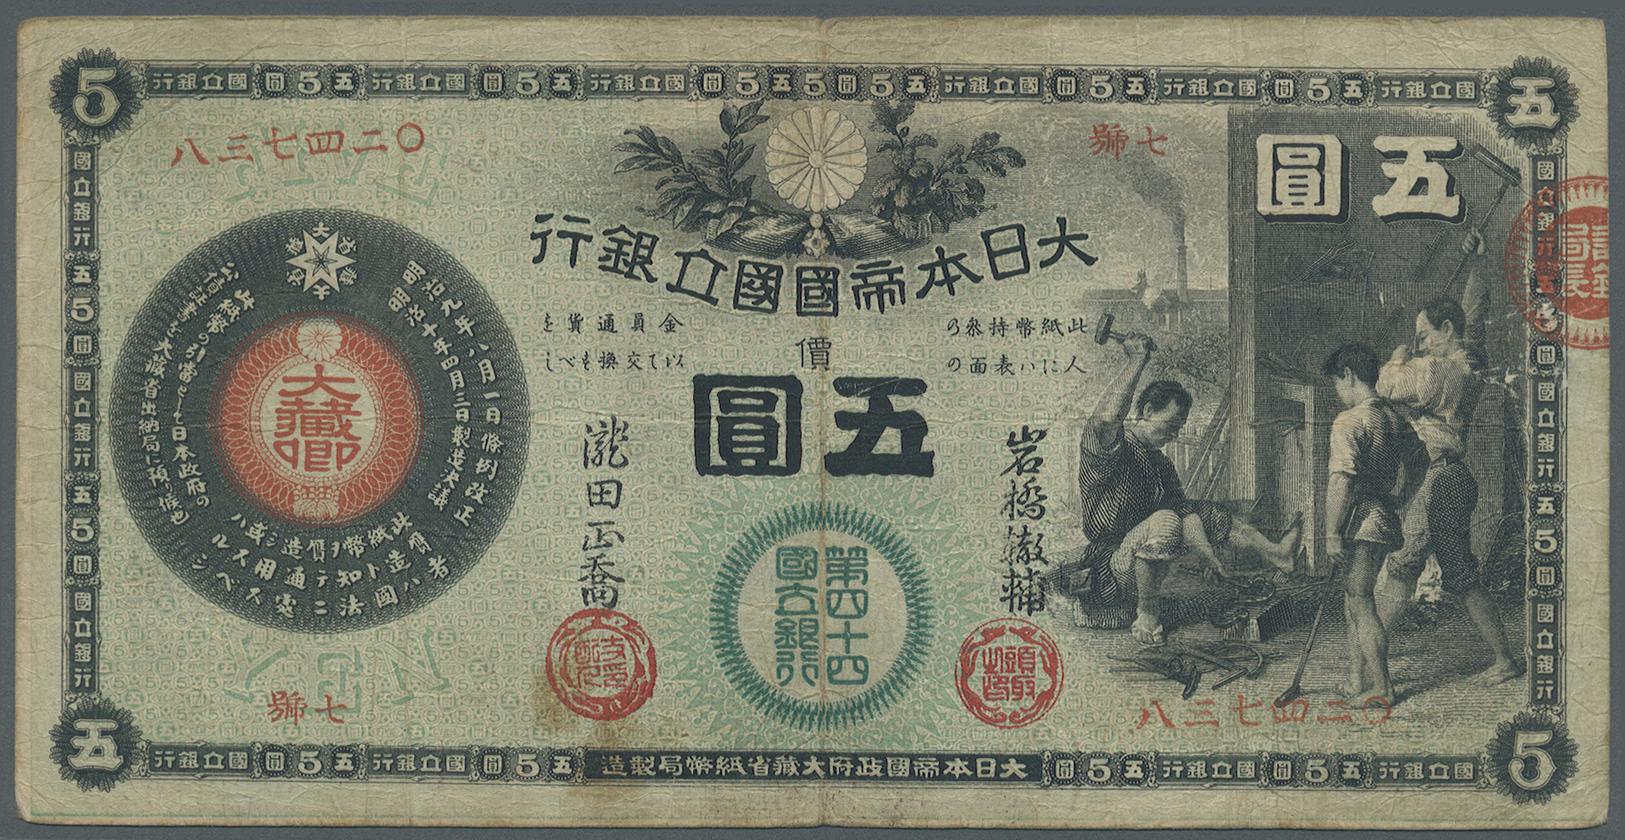 01302 Japan: 5 Yen ND (1878) P. 21 Issued By The Great Imperial Japanese National Bank. This Early Issue Of Japanese Ban - Japan